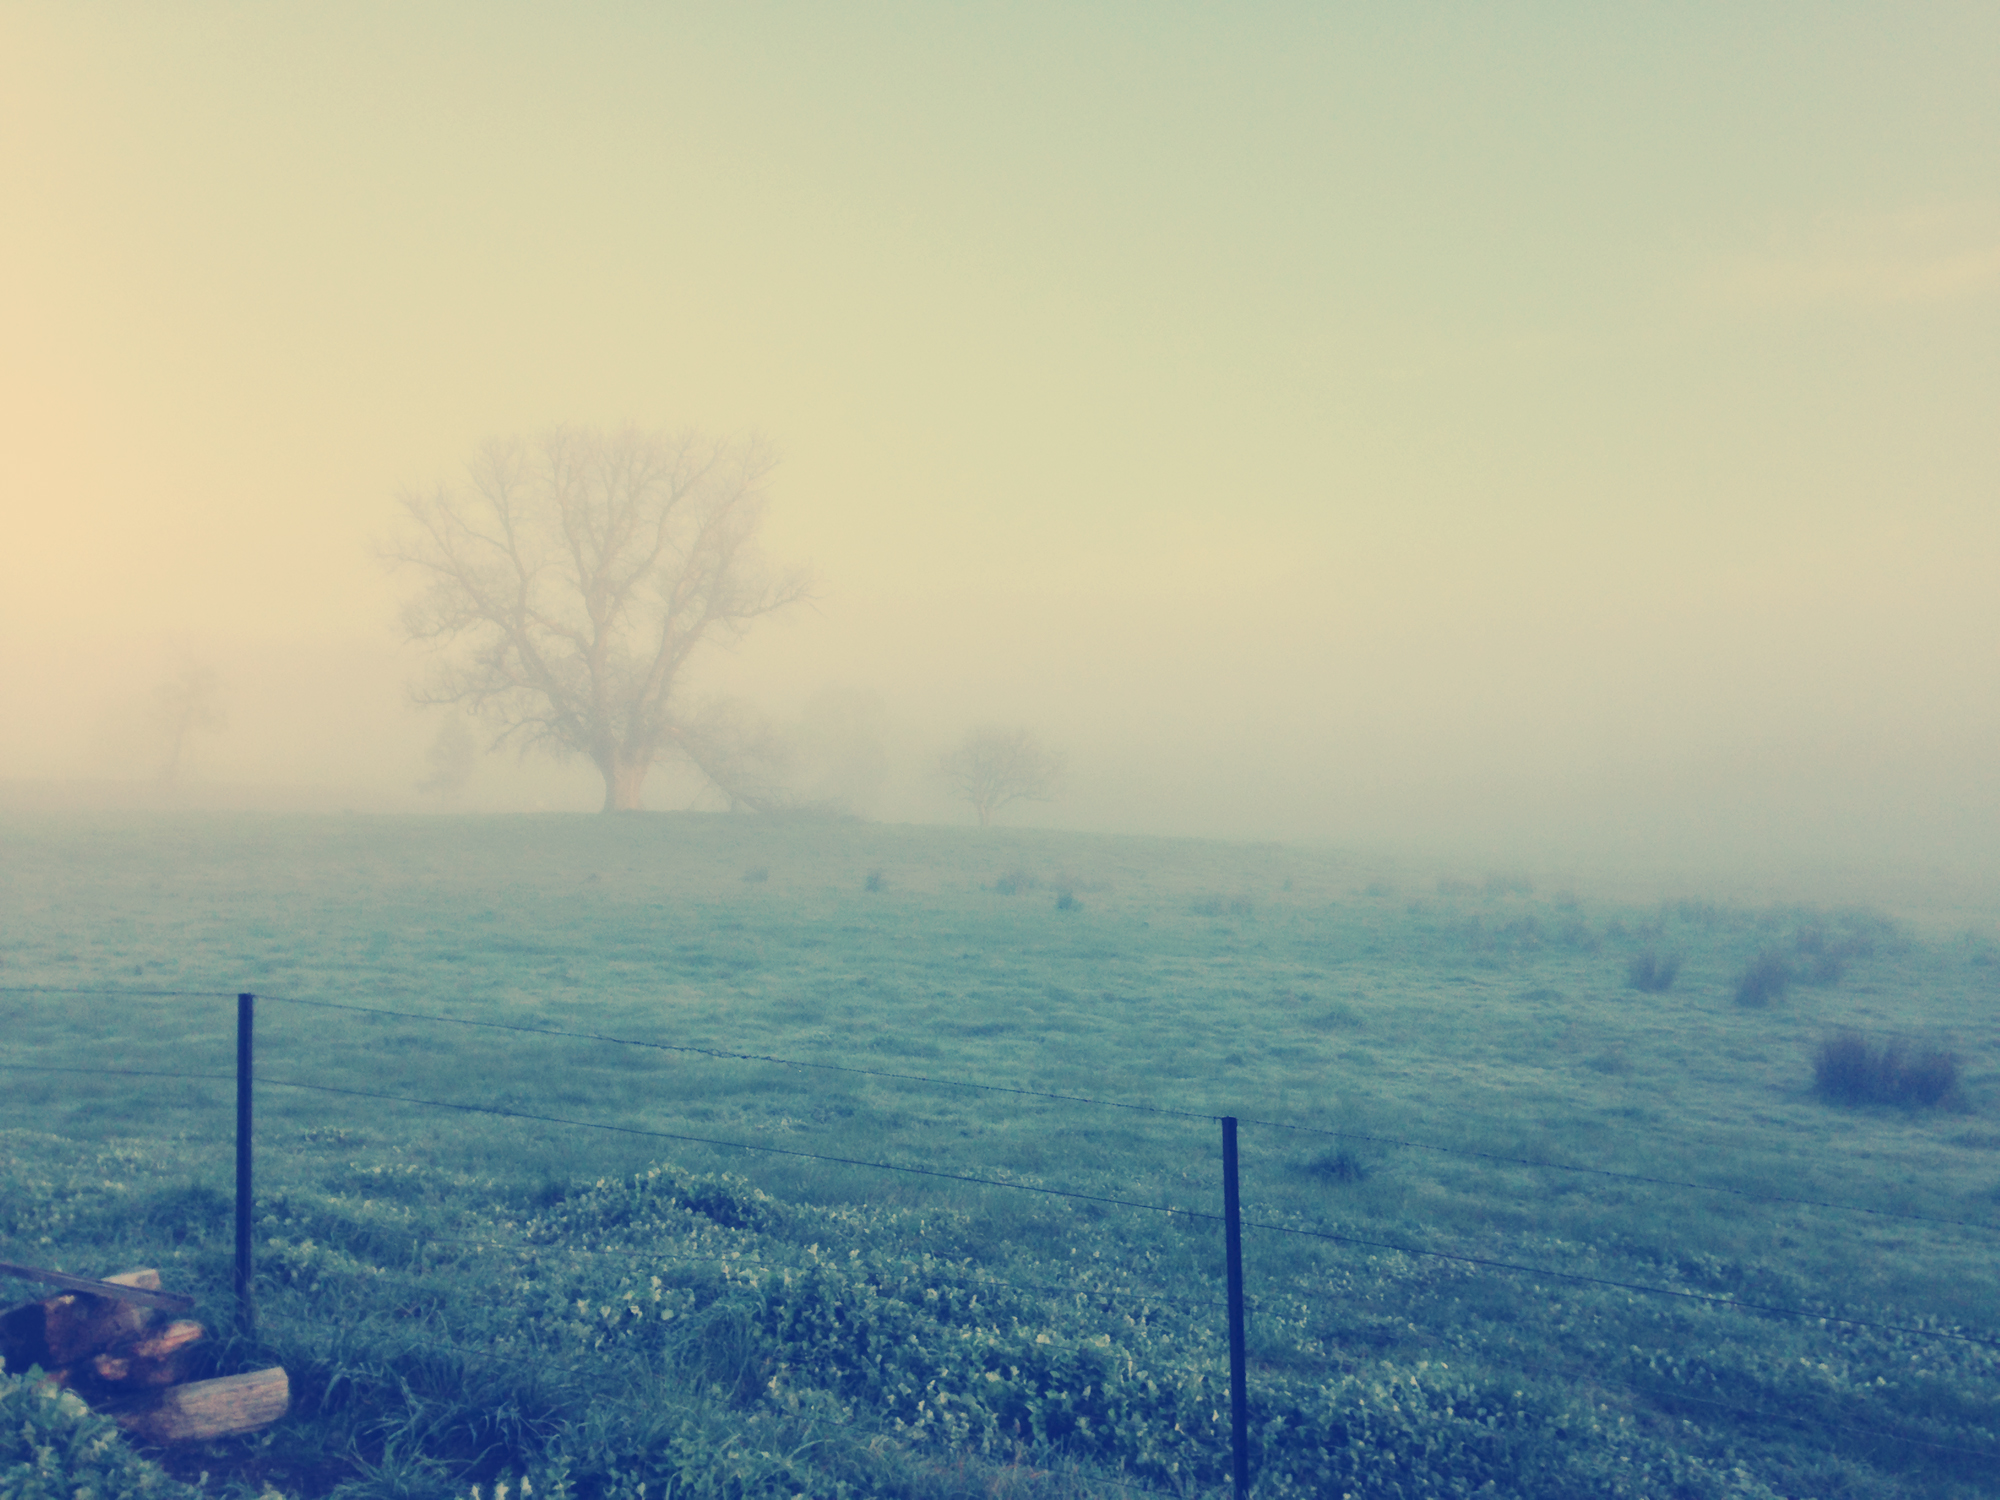 Nashville; Photography; Landscape; Rural; Country; Countryside; Dawn; Morning; Mist